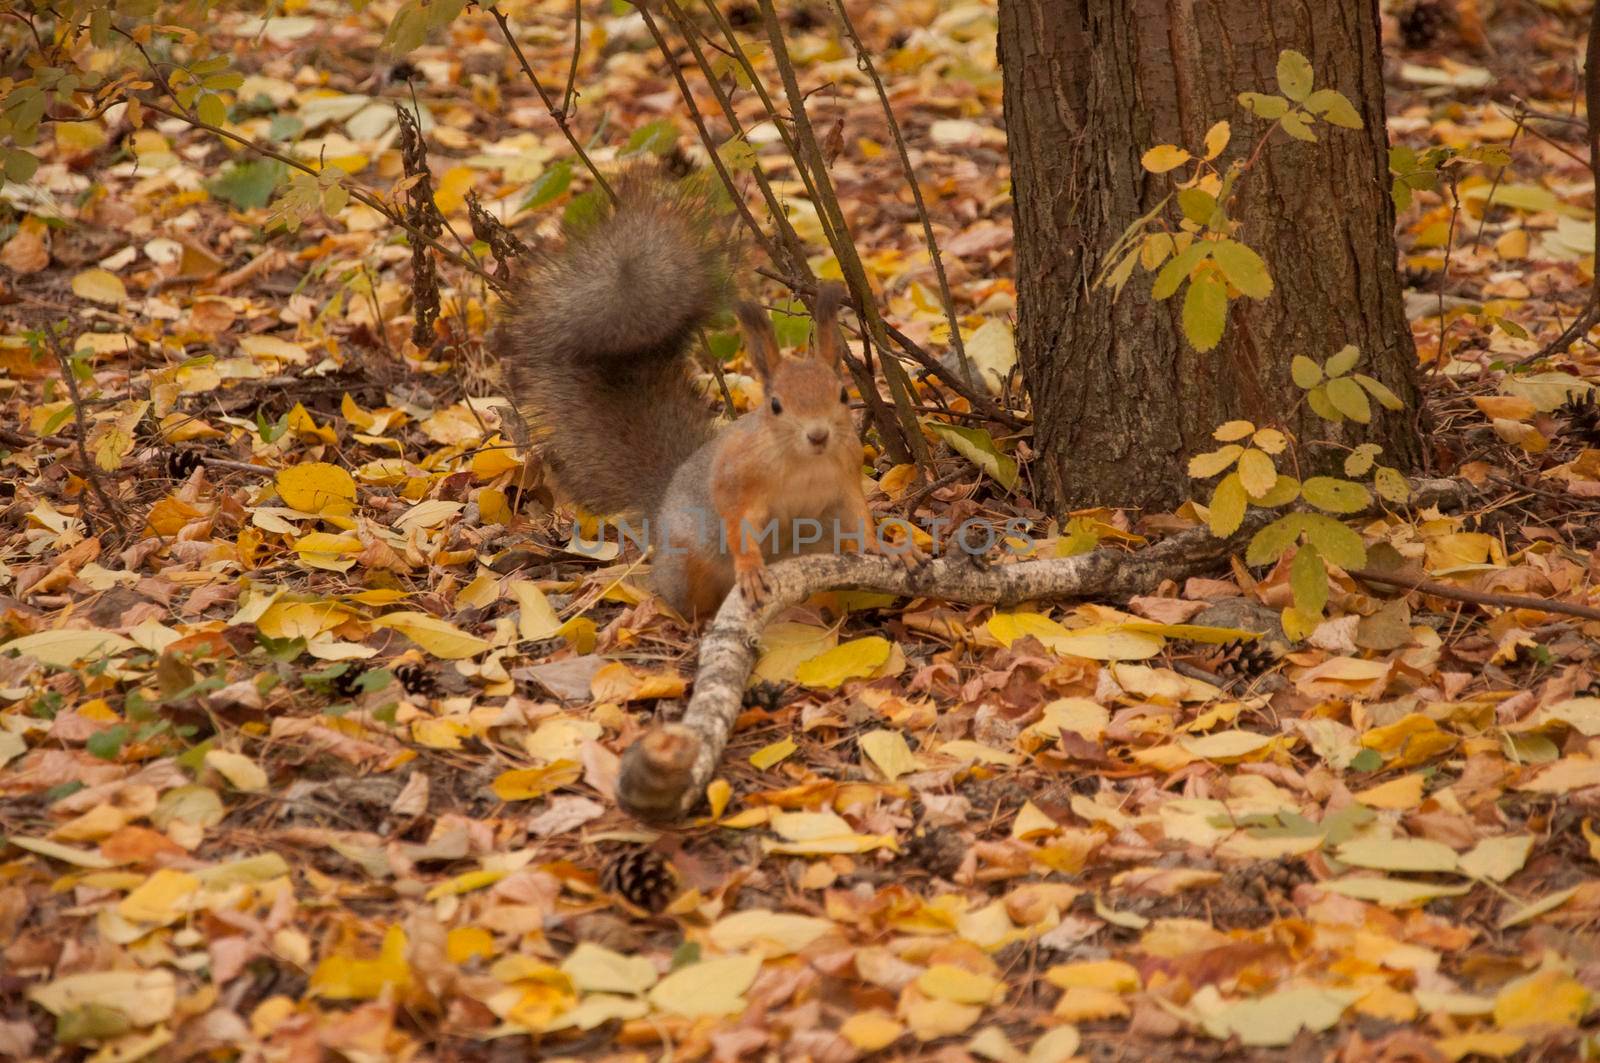  A wild squirel captured in a cold sunny autumn day